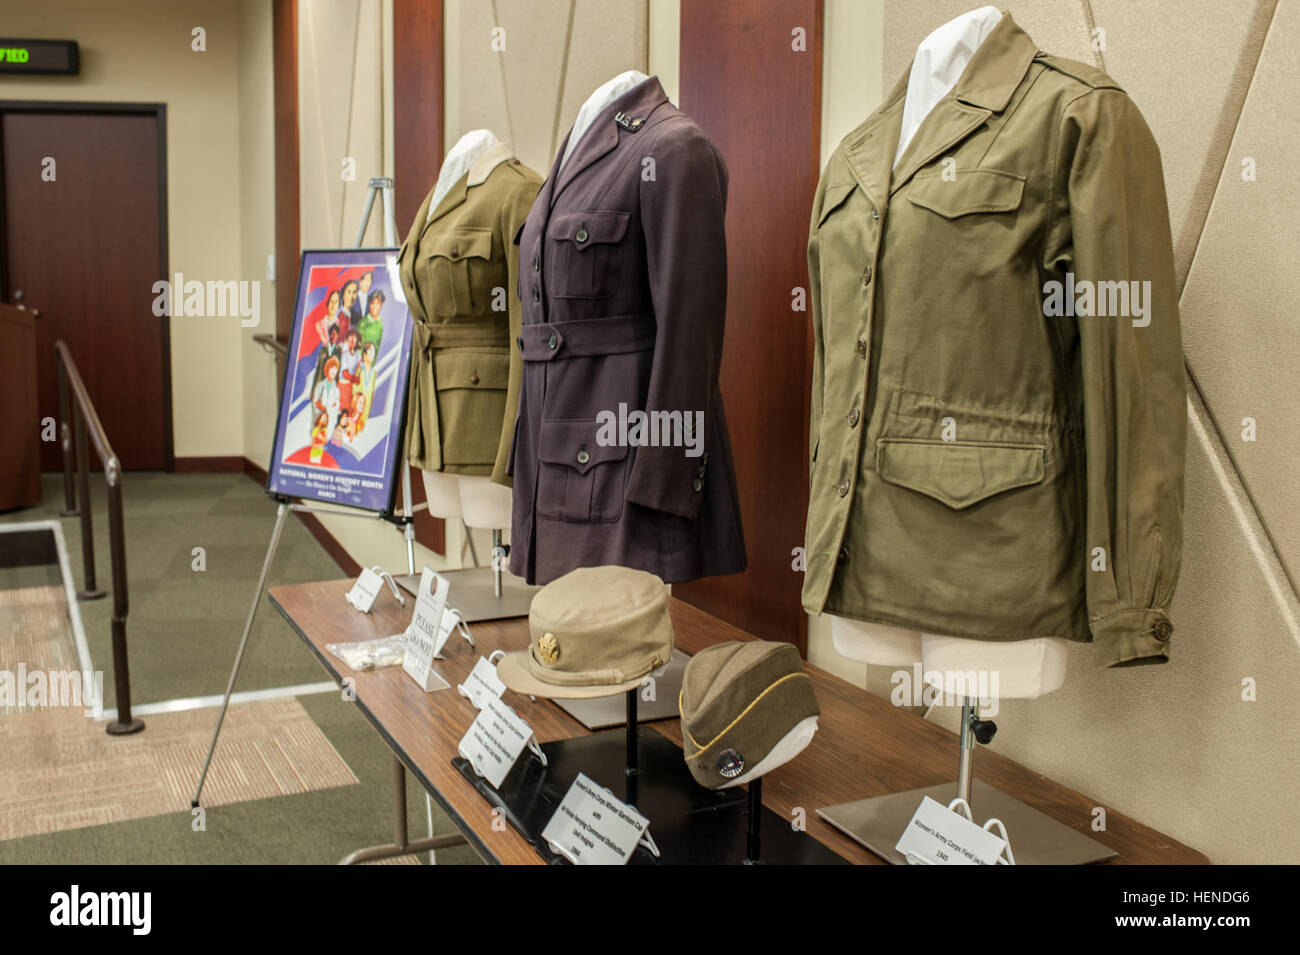 Women's Army uniforms and hats on display during a Women's History month presentation by Maj. Gen. Marcia M. Anderson, the Deputy Chief, U.S. Army Reserve, at the U.S. Army Reserve Command headquarters at Fort Bragg, N.C., March 25, 2014. Anderson, the Army's first African American female major general highlighted the accomplishments of women dating back to the Revolutionary War and the current evaluation process of opening previously closed military occupations to women. (U.S. Army photo by Timothy L. Hale/Released) Women continue to prove themselves in uniform 140325-A-XN107-845 Stock Photo